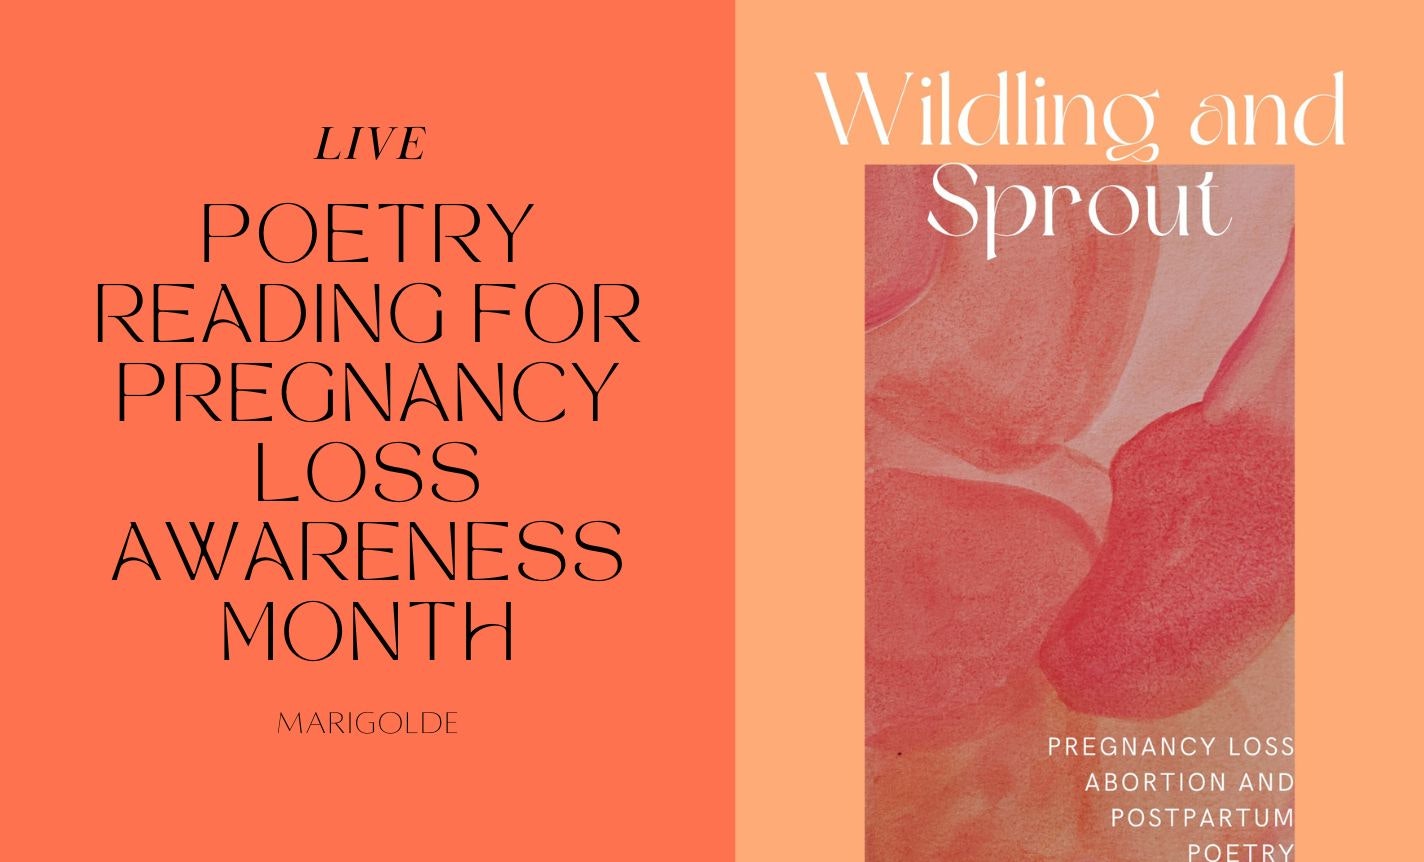 Live Poetry Reading for Pregnancy Loss Awareness Month